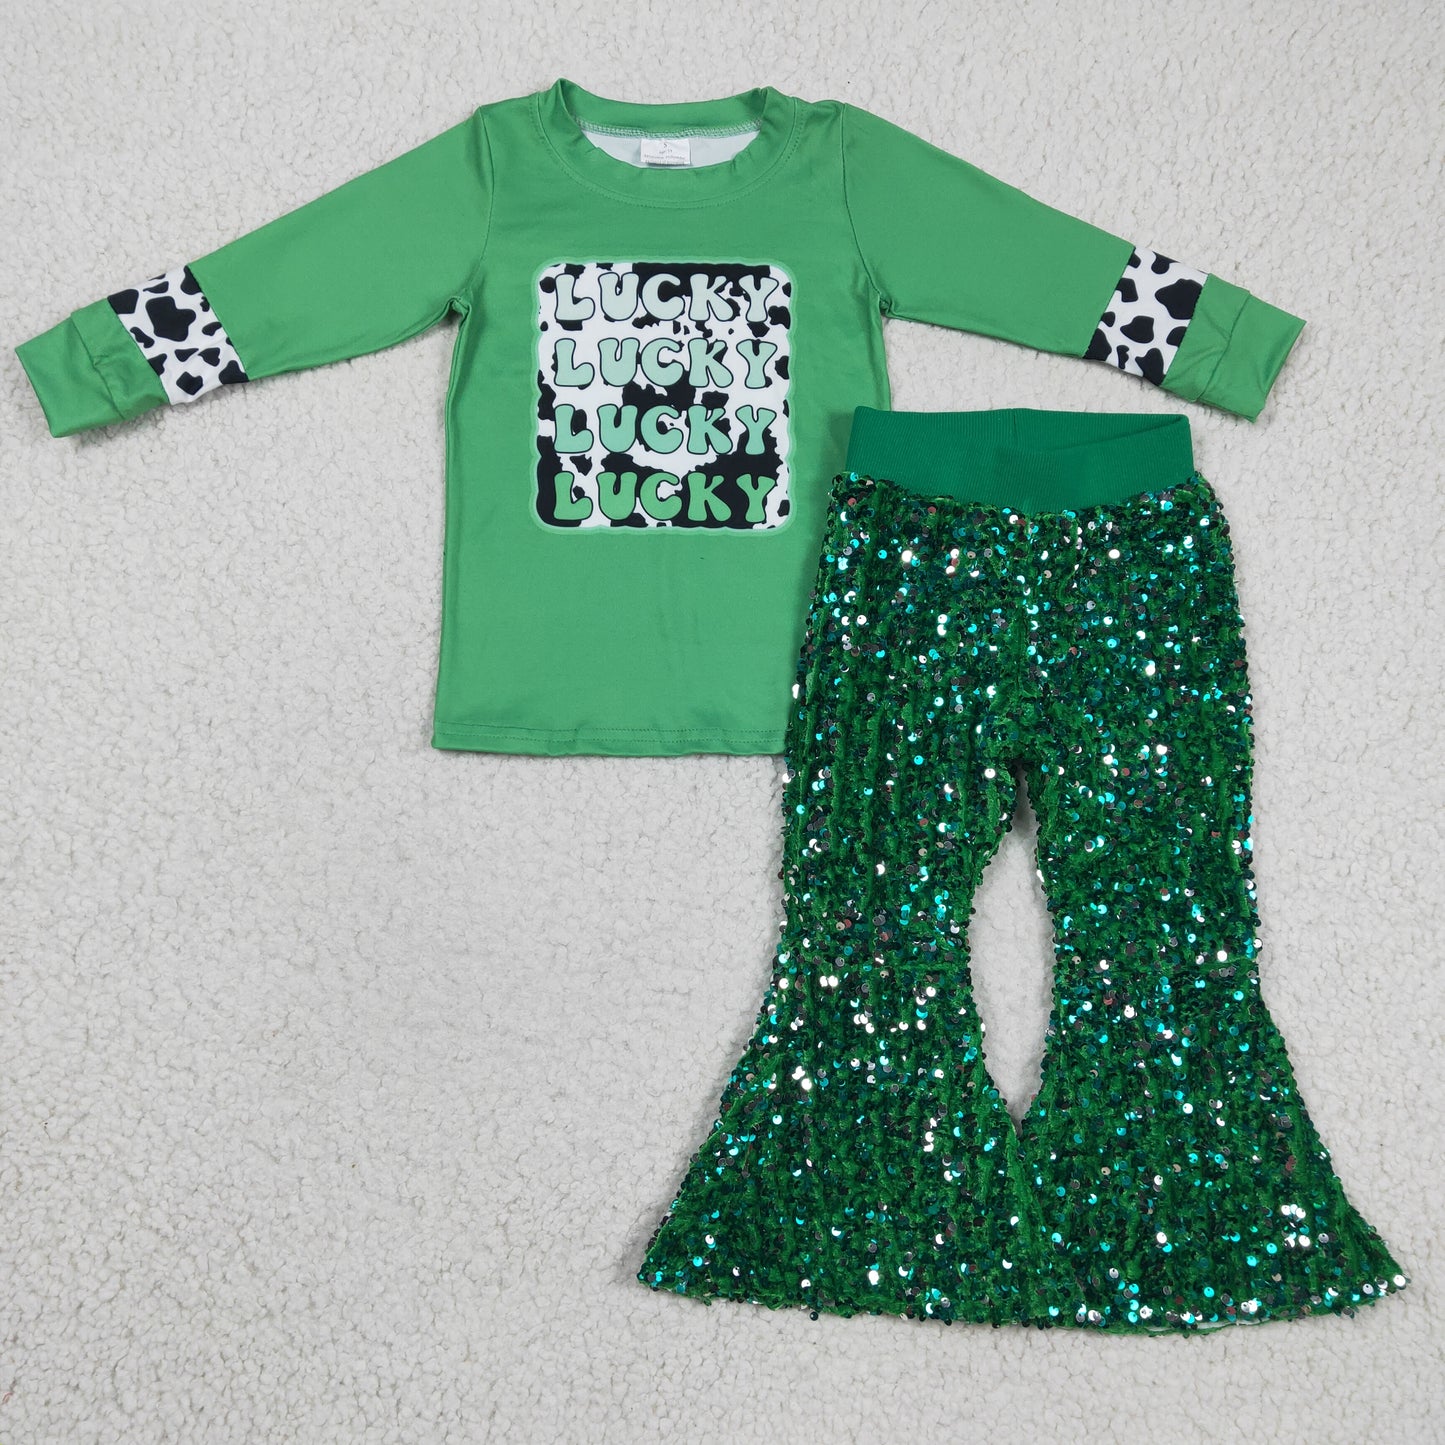 Girls green LUCKY print St. Patrick's Day top sparking bell bottom pants outfits GLP0421